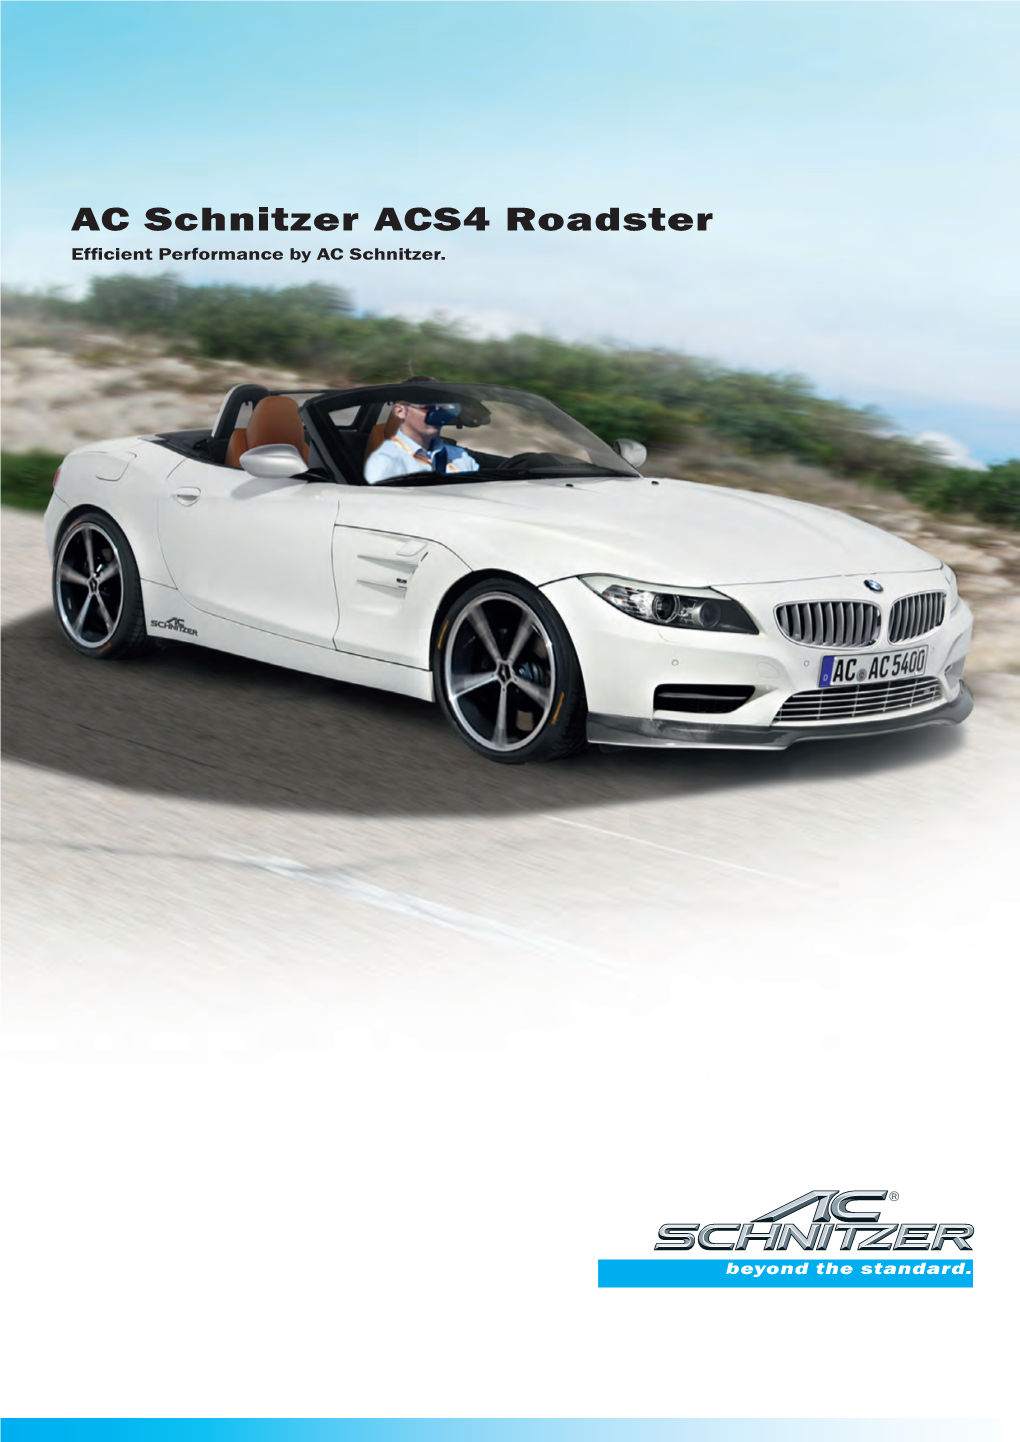 AC Schnitzer ACS4 Roadster Efﬁ Cient Performance by AC Schnitzer